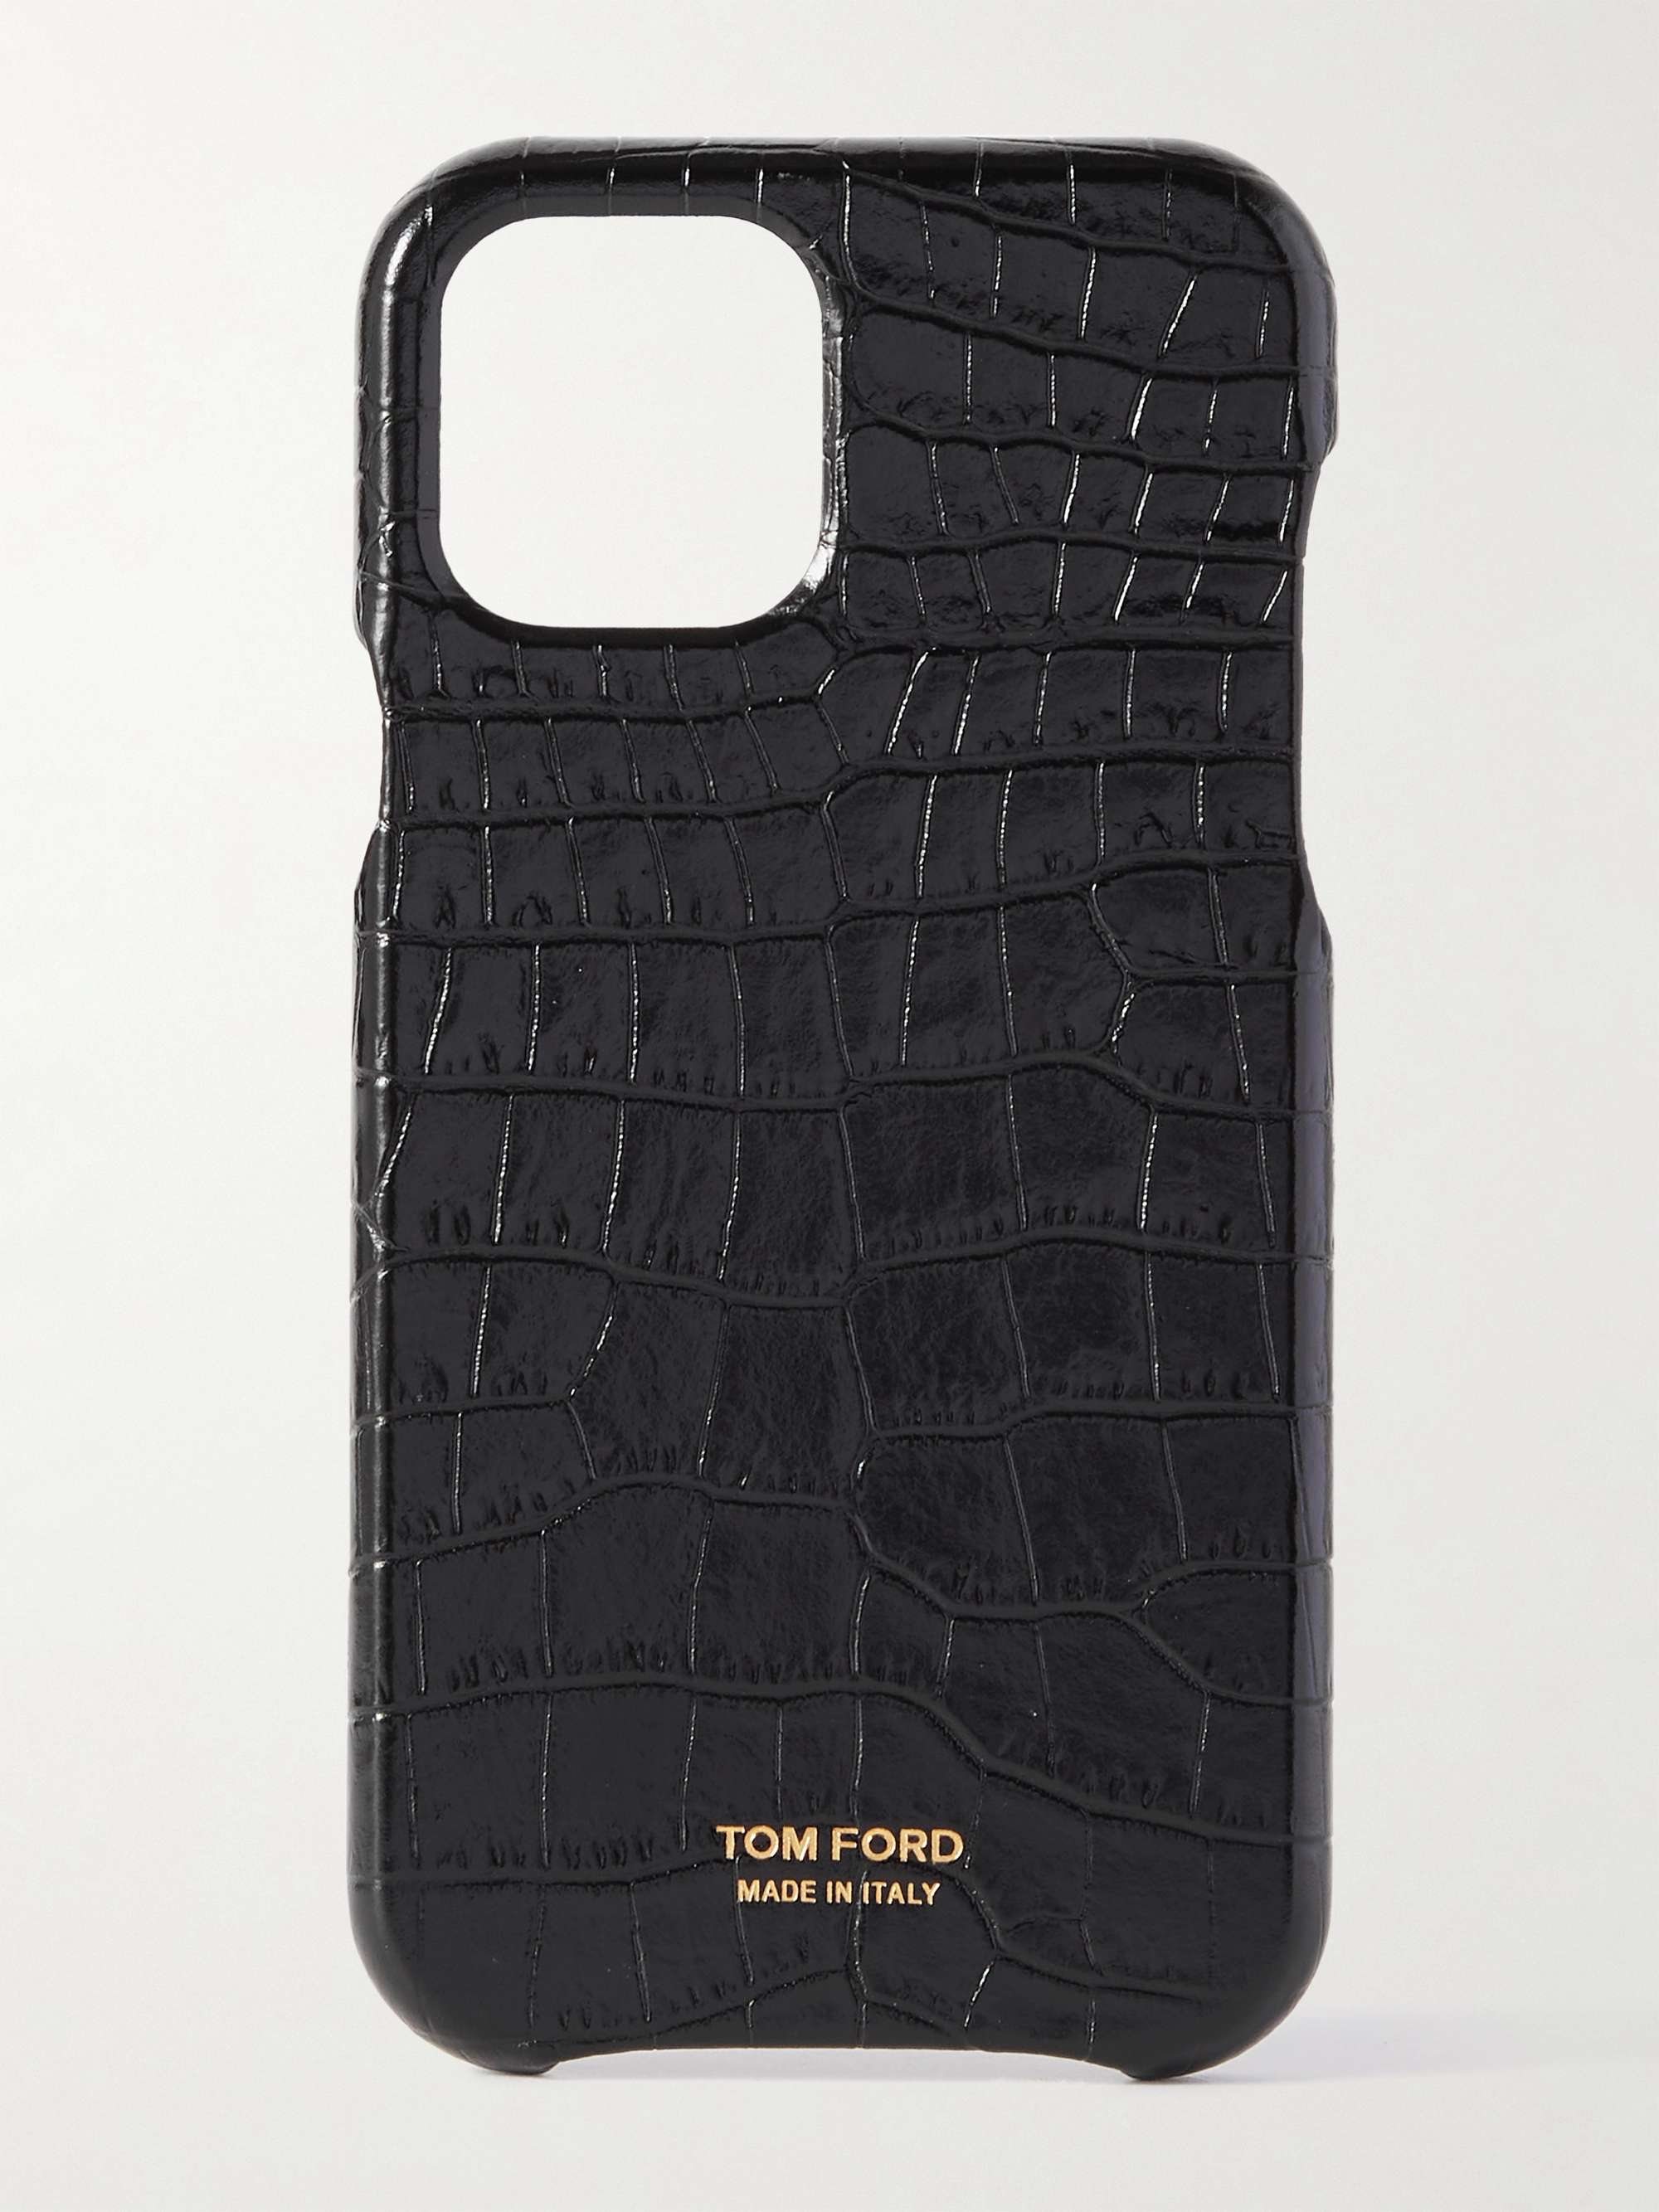 TOM FORD Croc-Effect Leather iPhone 12 Pro Case